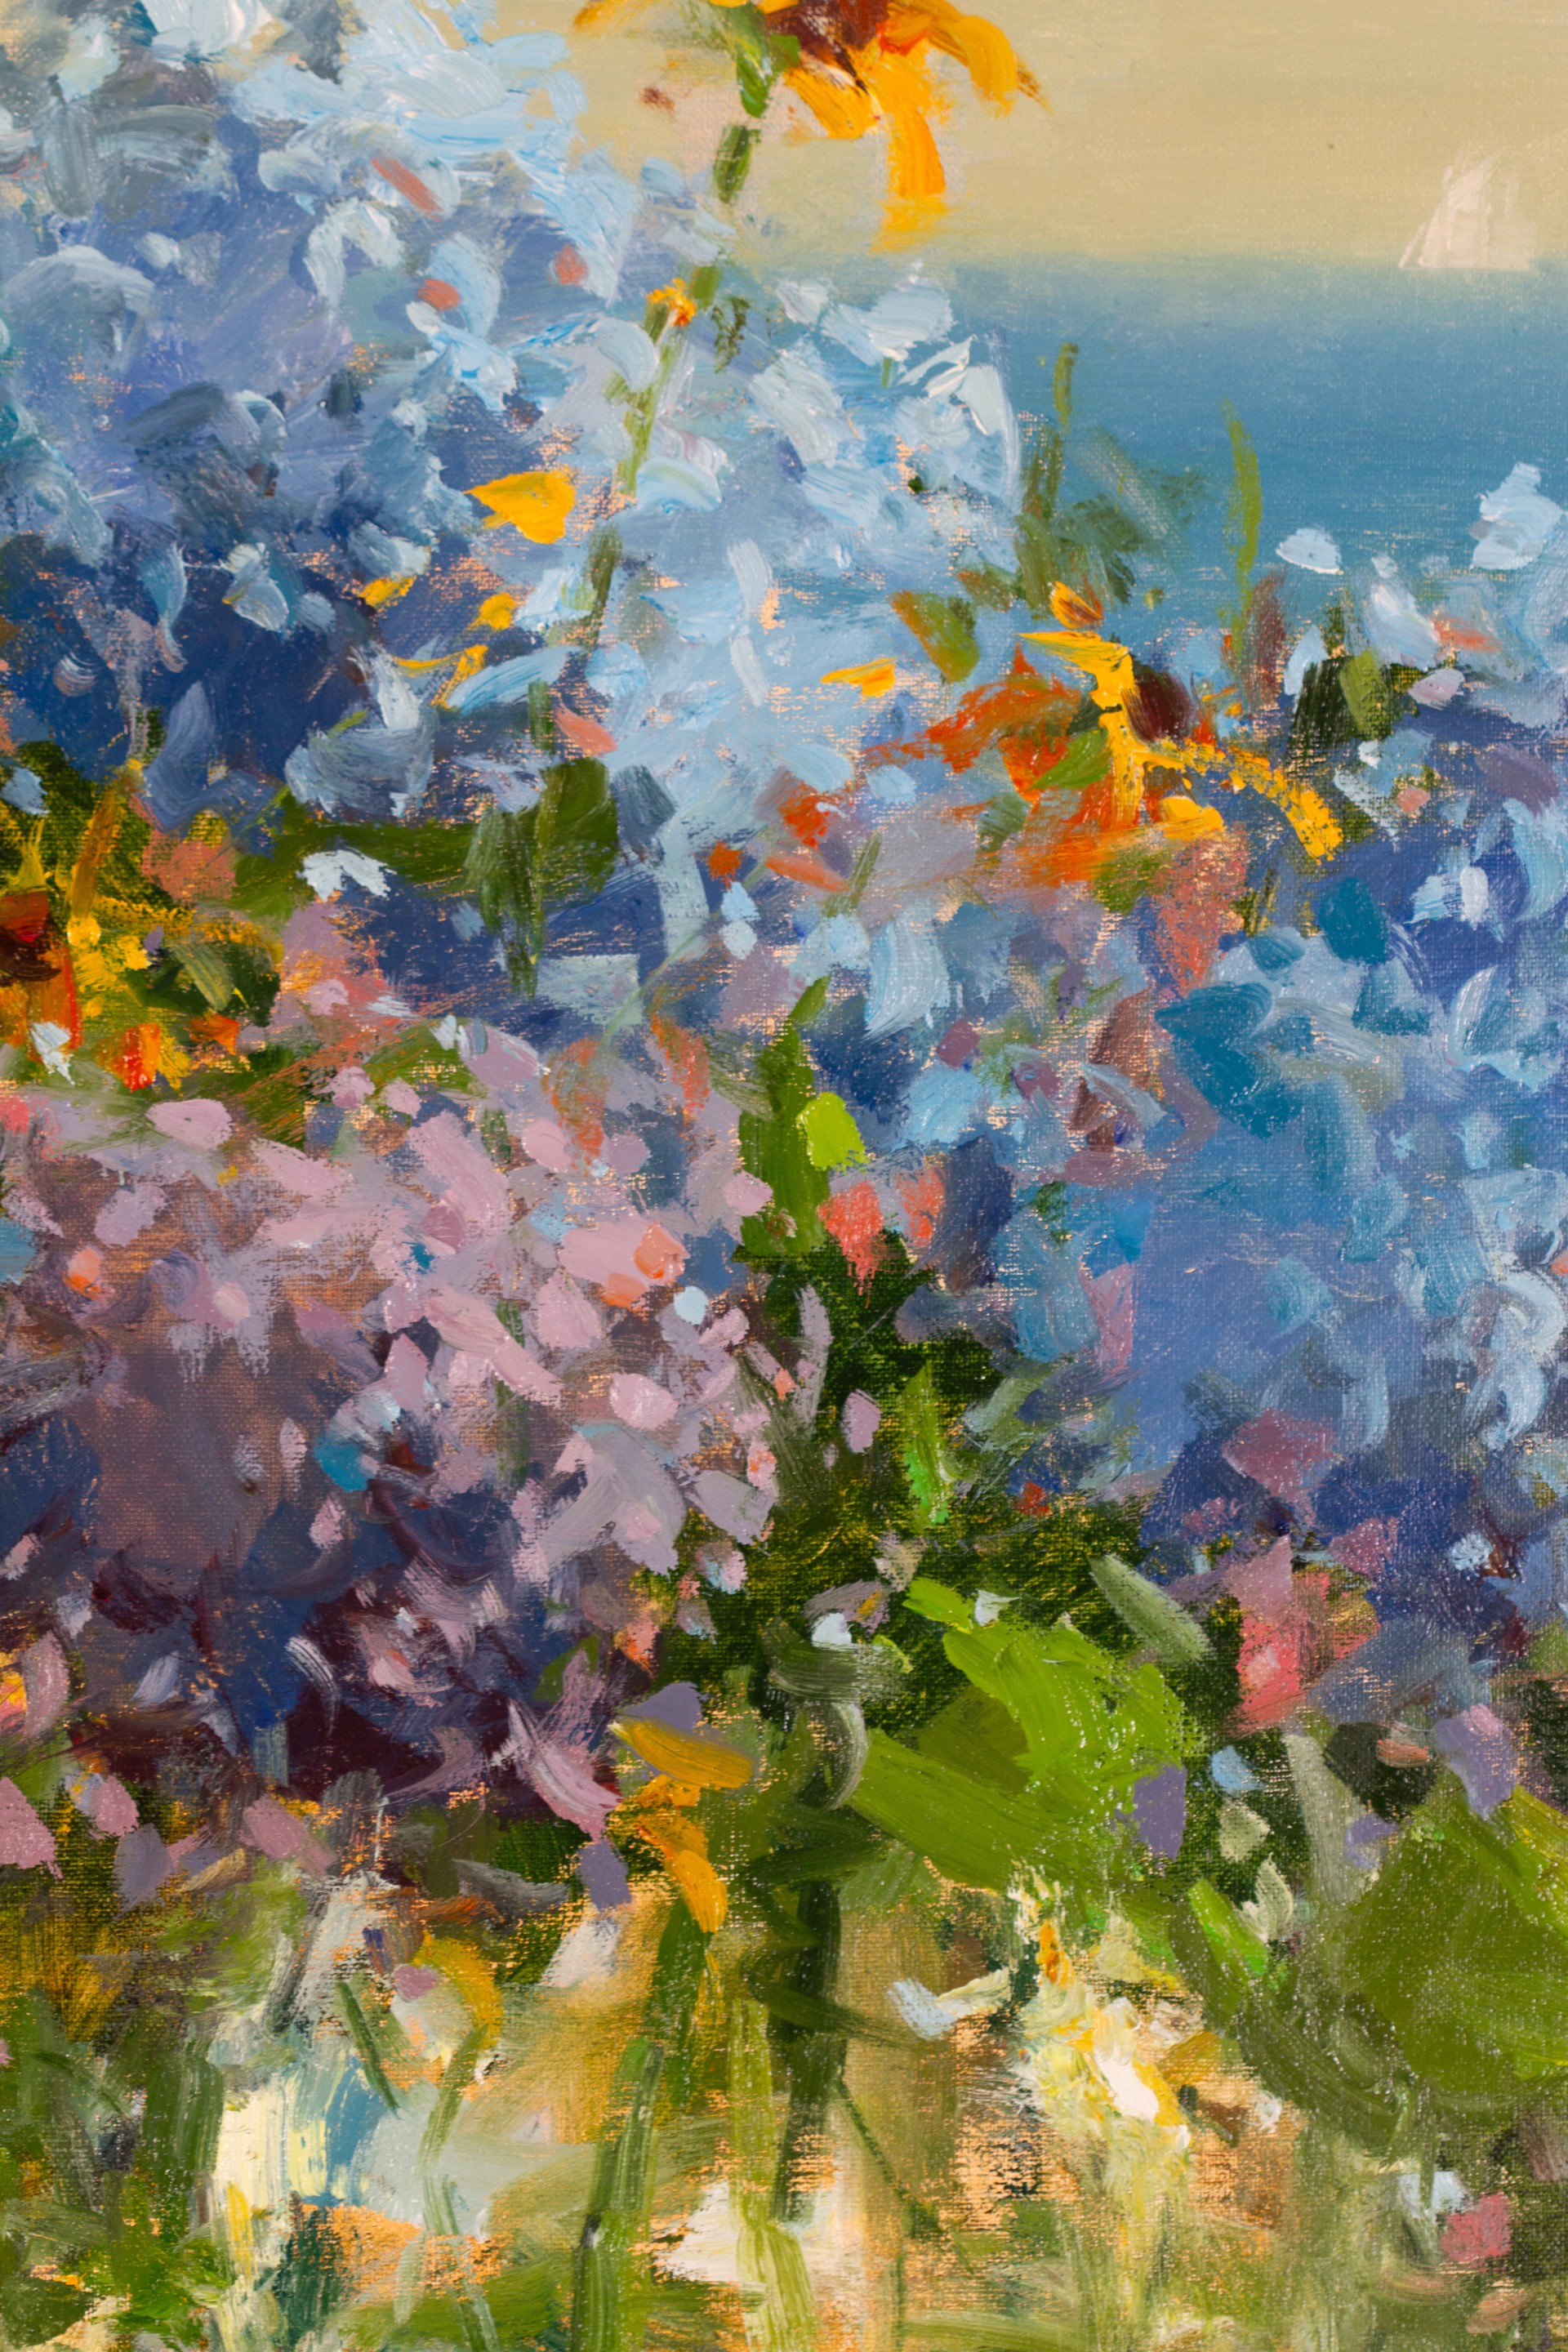 Fresh Blooms by the Ocean by Jonathan McPhillips